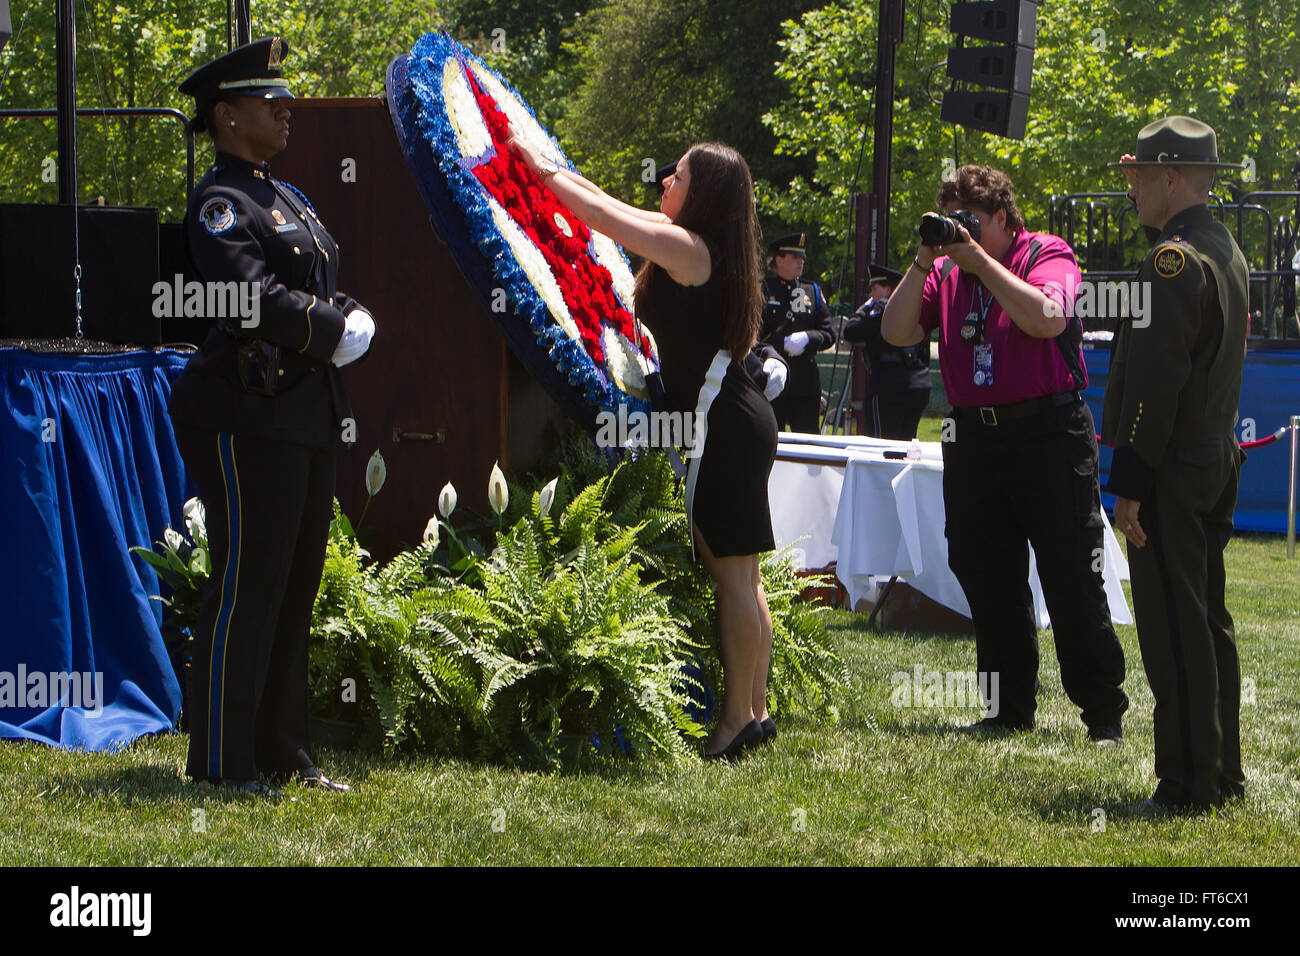 051515: Washington, DC - During Police Week the National Peace Officer's Memorial Service was held at the Capitol in honor of fallen agents and officers across the nation.  The sister of fallen agent Alexander Giannini pins a memorial flower to the wreath during the Roll Call of Heroes of 2014. Photographer: Donna Burton Stock Photo